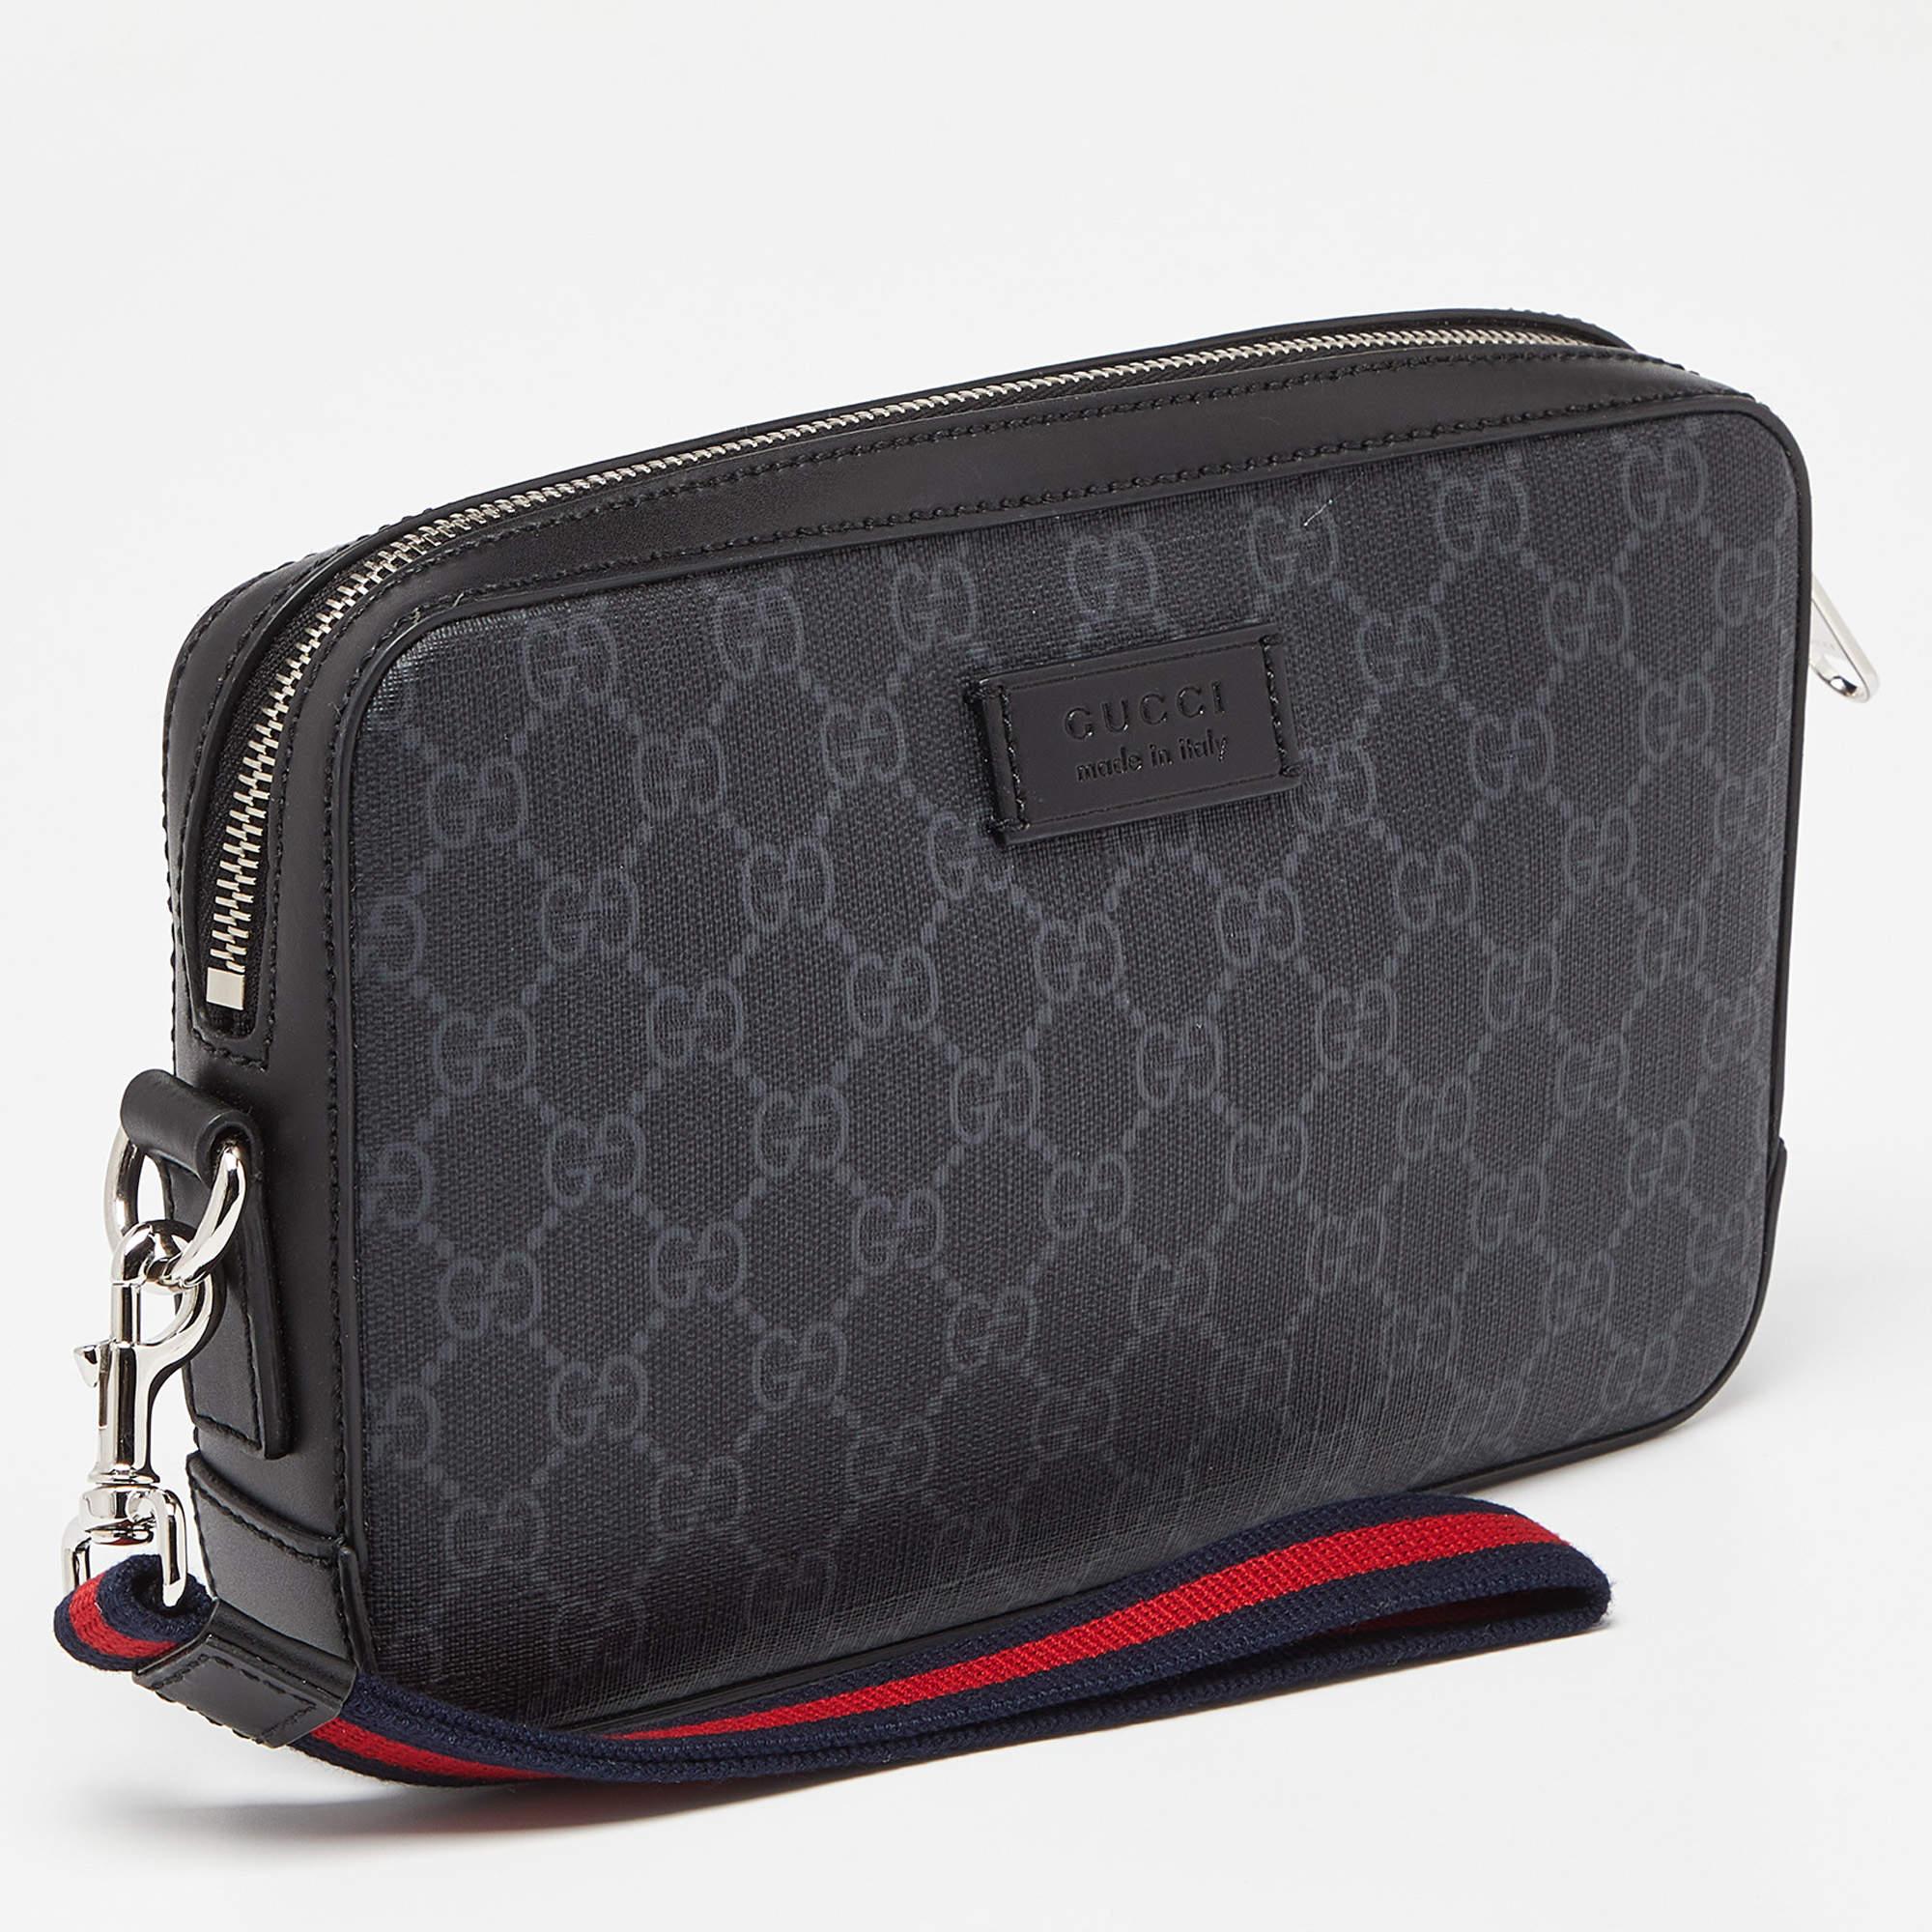 Women's Gucci Black/Grey GG Supreme Canvas and Leather Wristlet Pouch